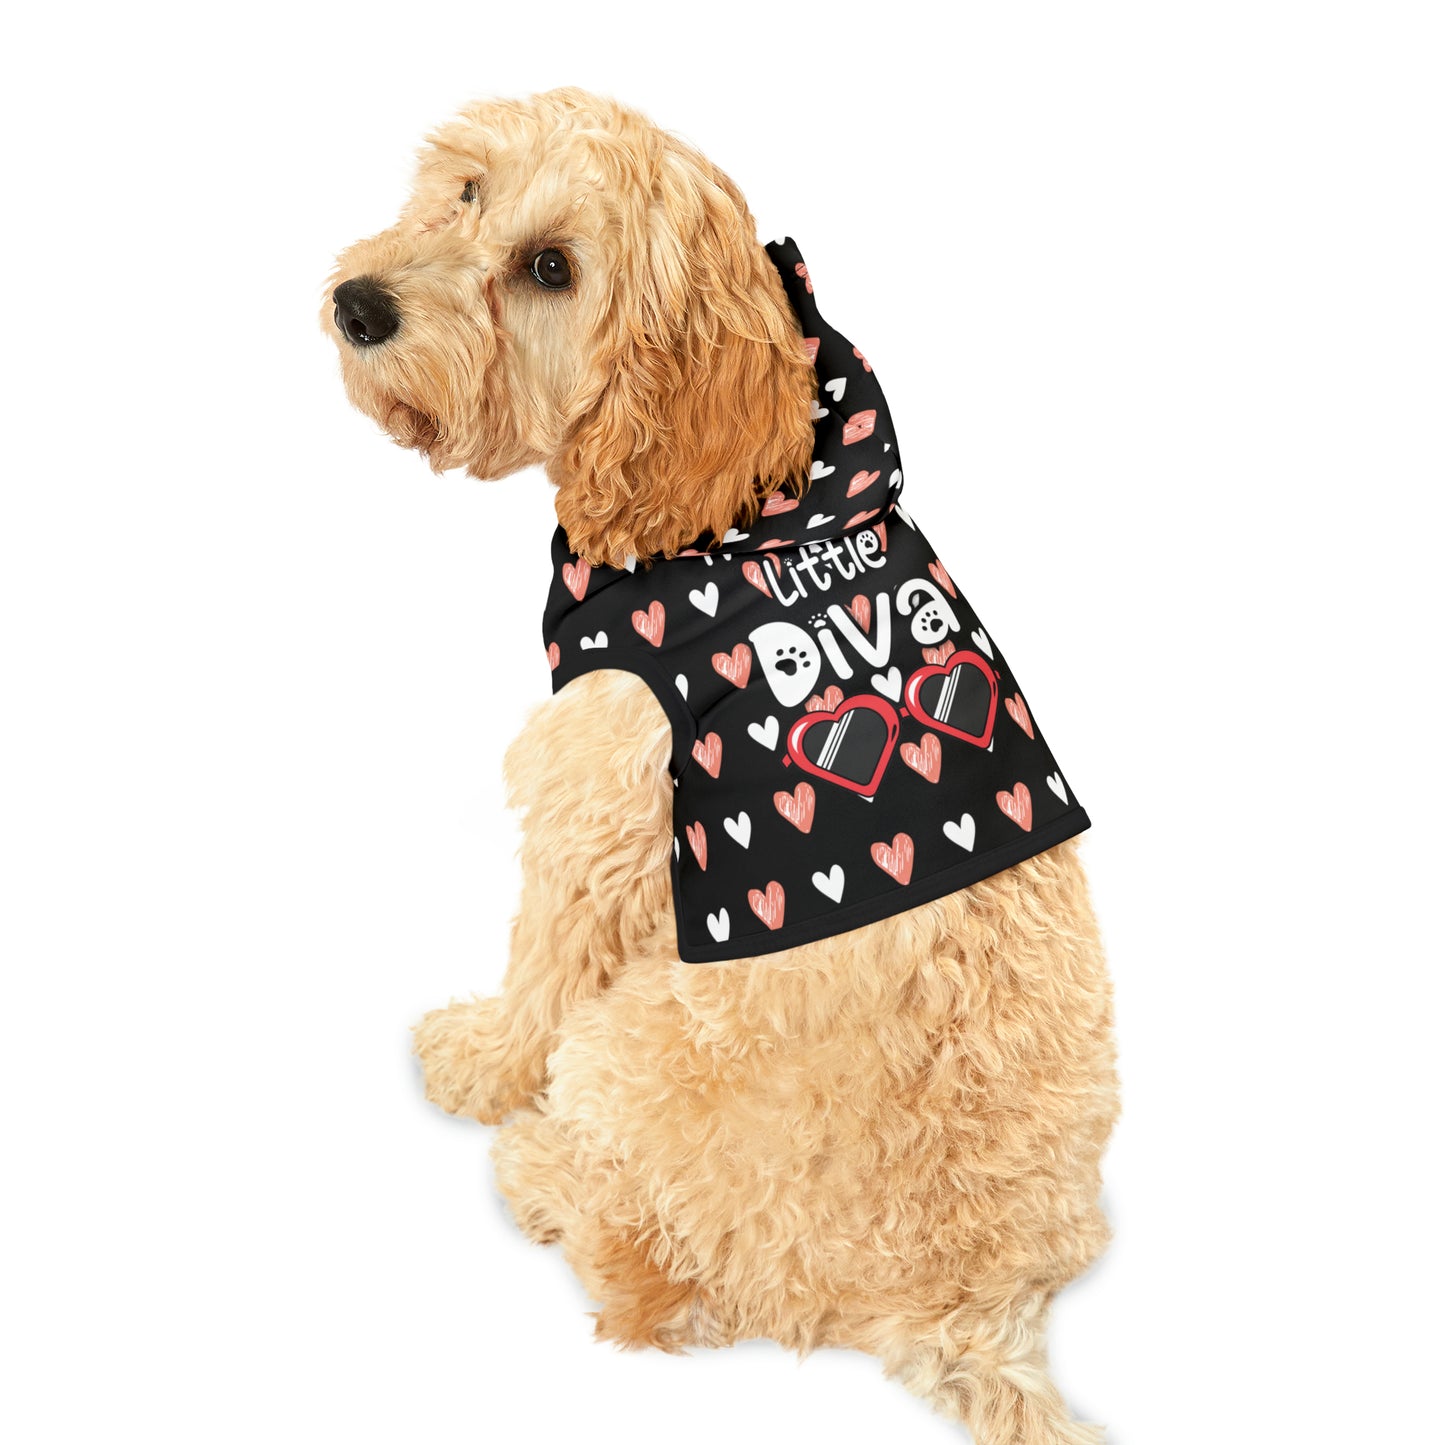 cute dog wearing a pet hoodie with a beautiful hearts pattern design with a message that says: "I'm a Sassy Little Diva" and sun glasses. Hoodie's Color is black